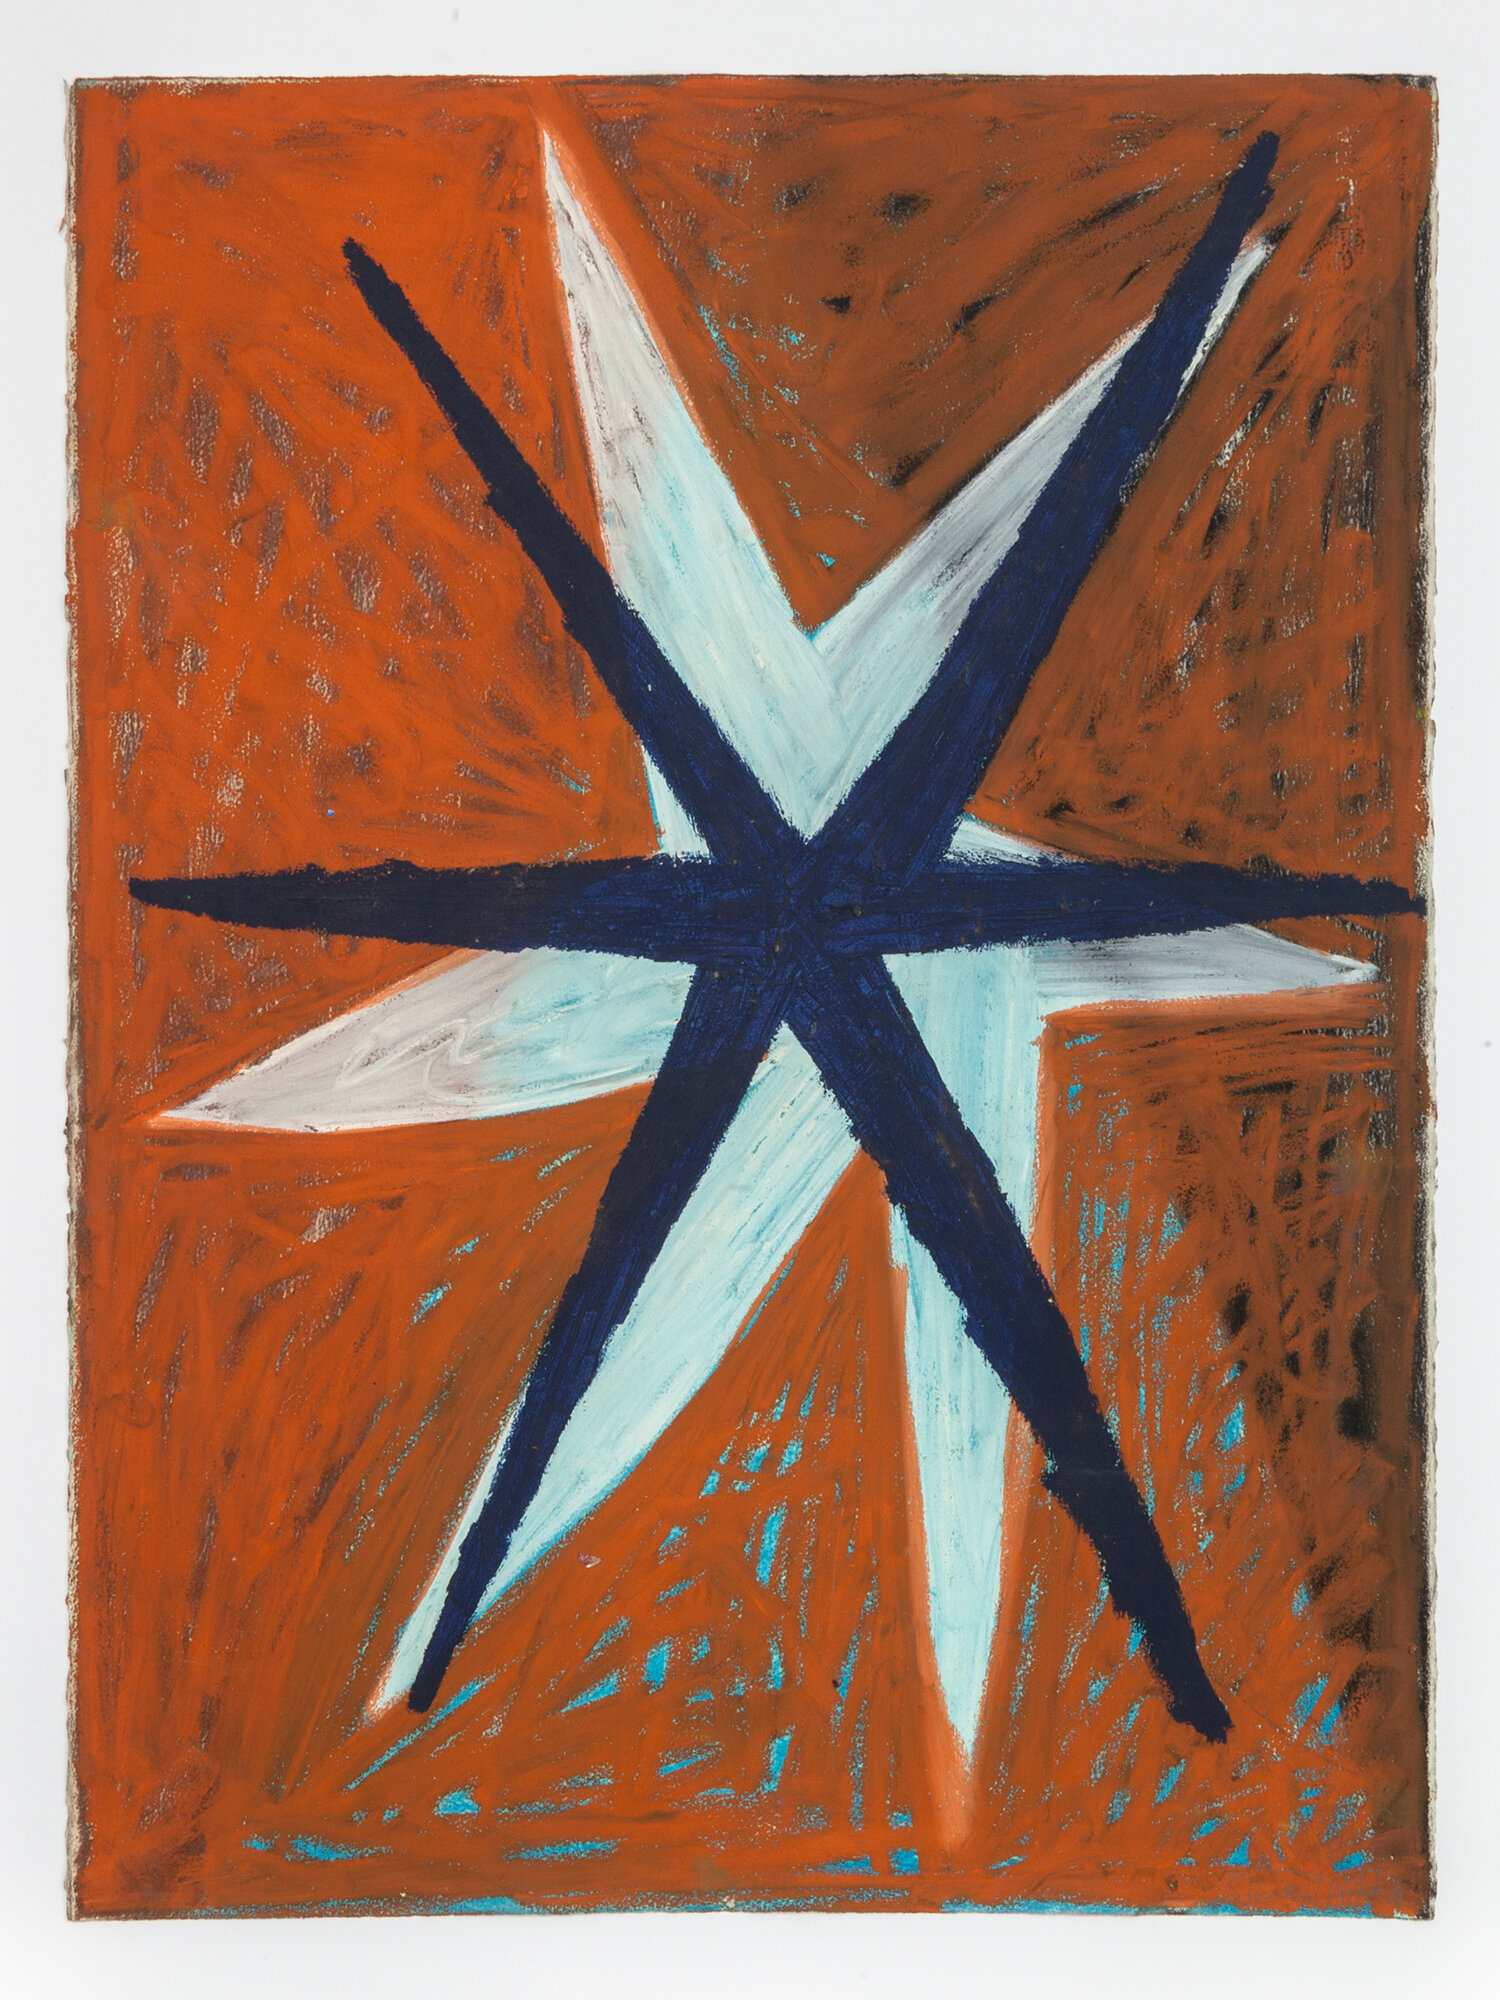  Stewart Hitch,  Untitled,  1981, Oil stick and pastel on paper 30 x 22 inches 